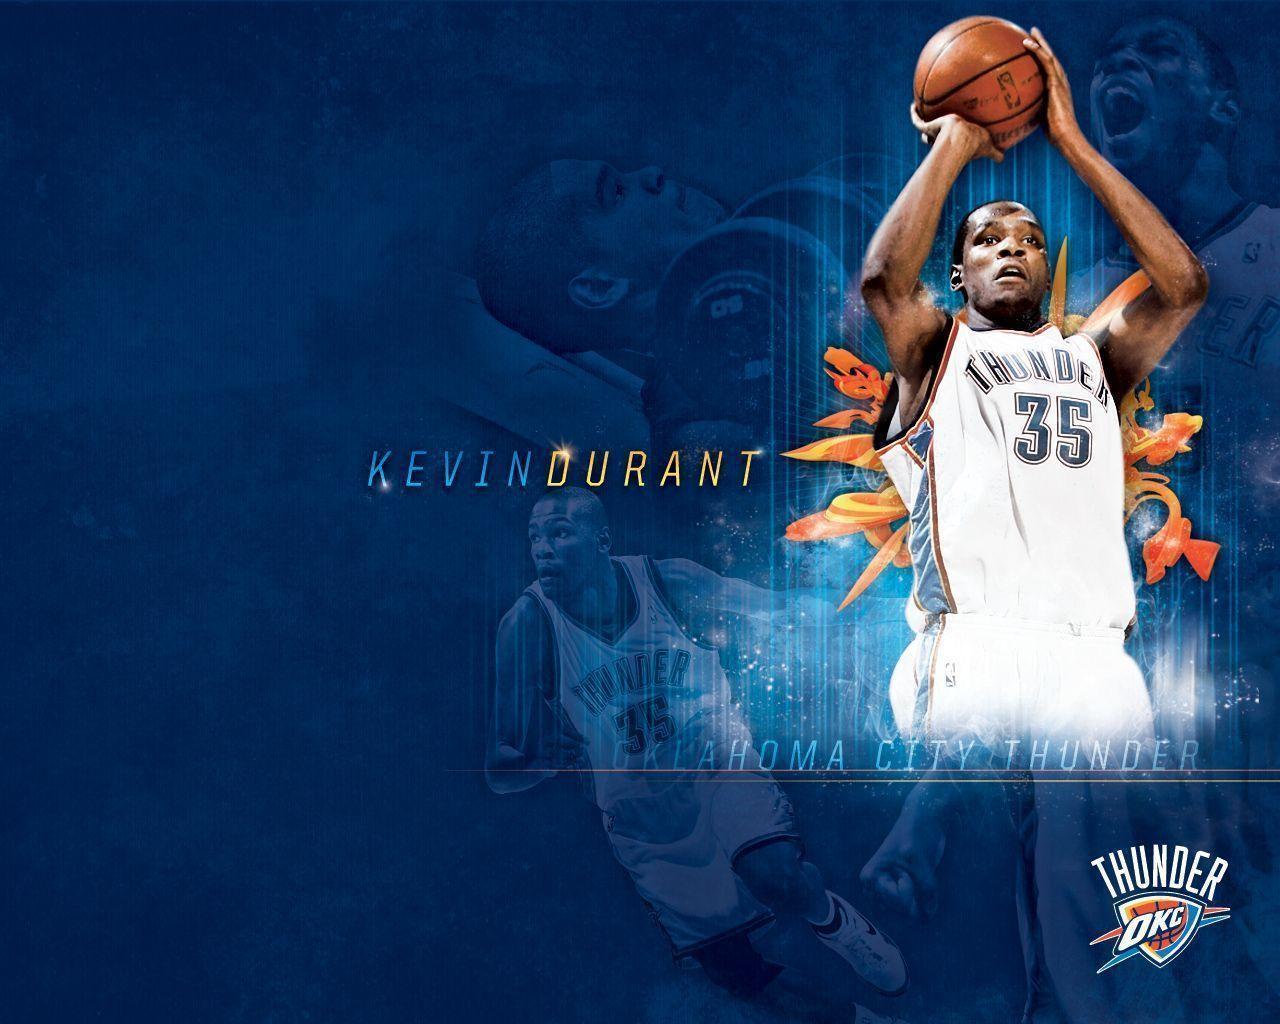 Kevin Durant Background 1 HD Wallpaper. lzamgs